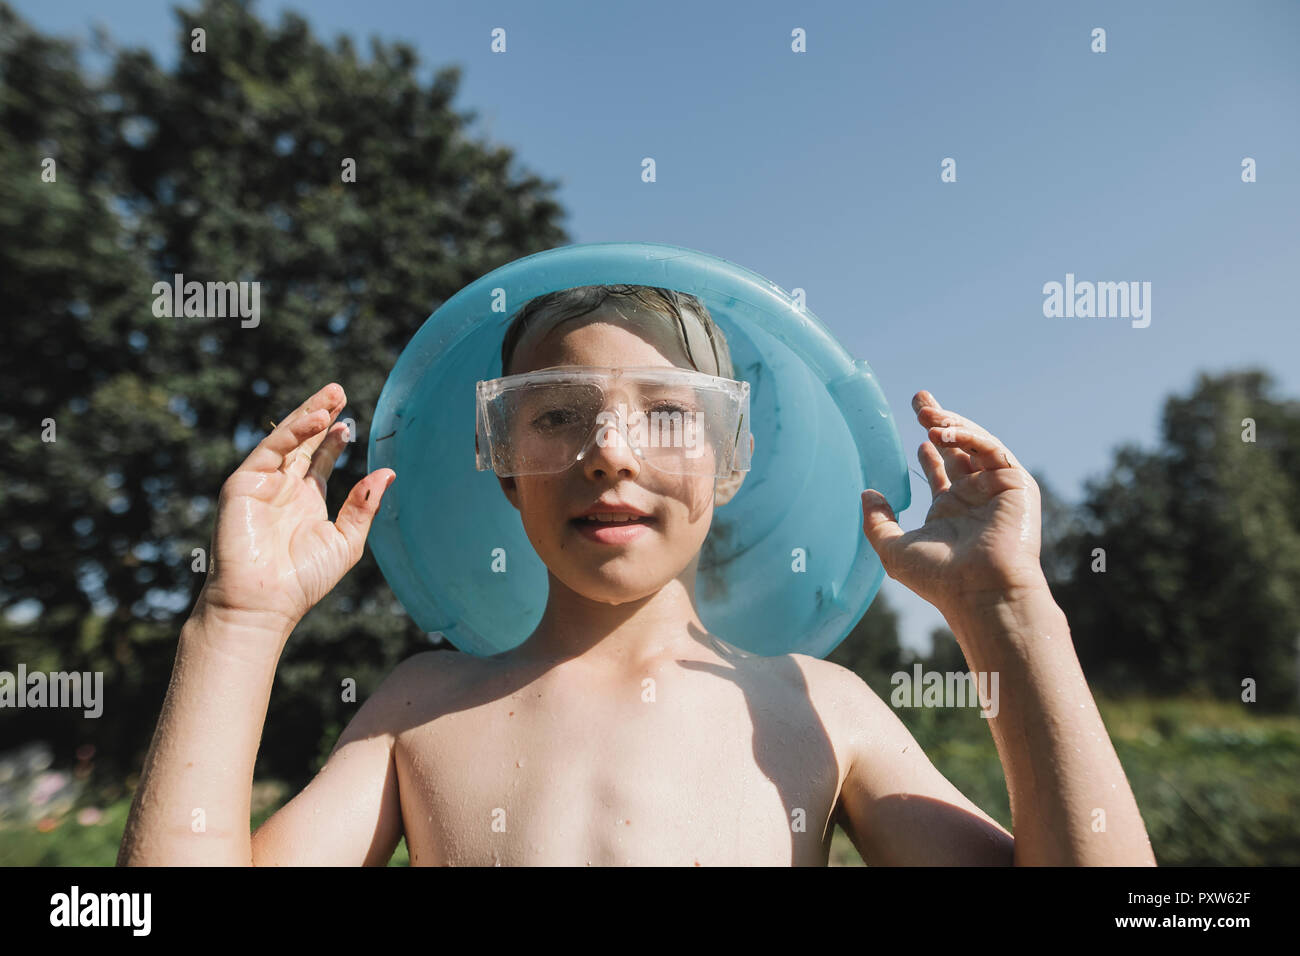 Wet boy wearing safety goggles holding bowl above his head in garden Stock Photo